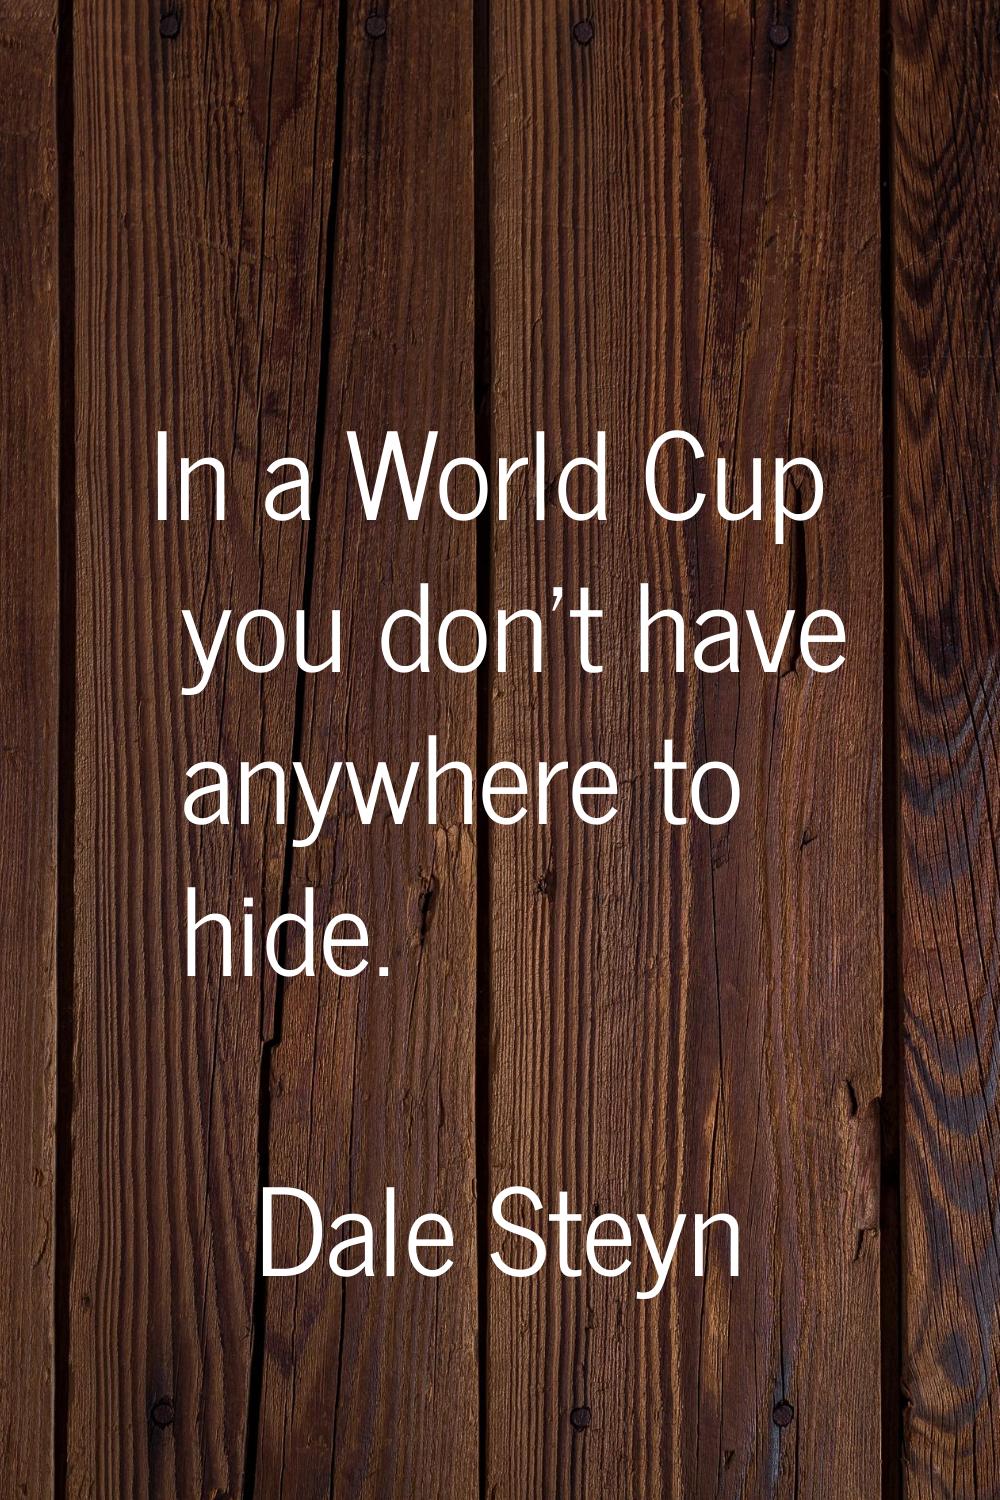 In a World Cup you don't have anywhere to hide.